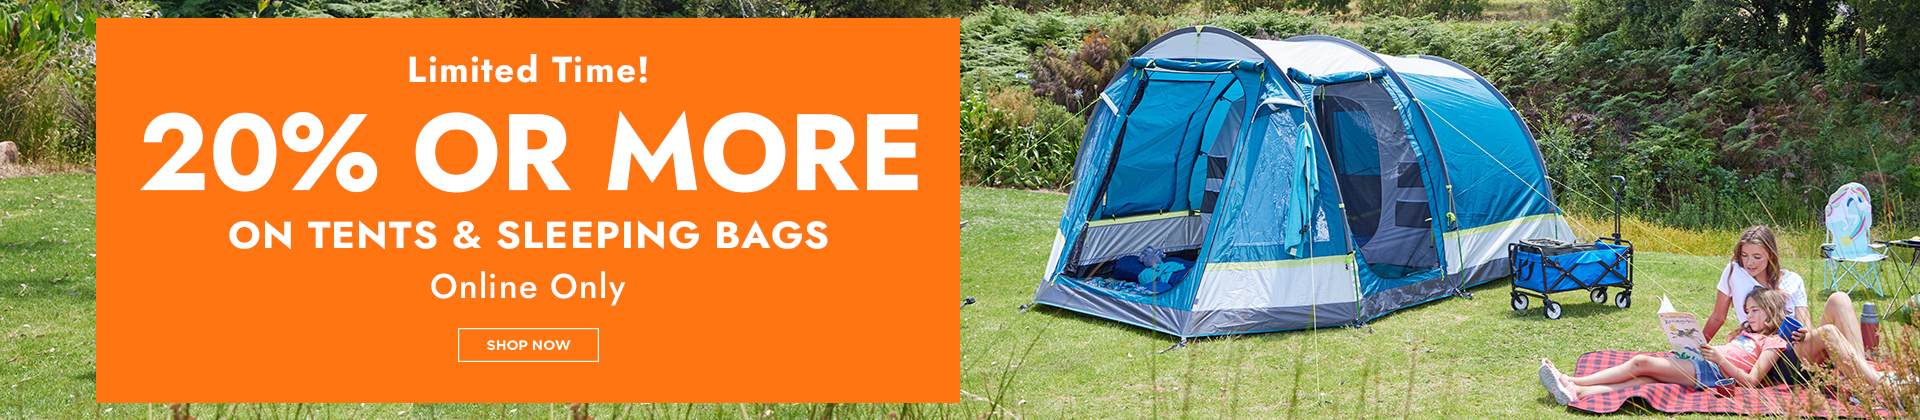 H1: 20% Off Tents & SLE